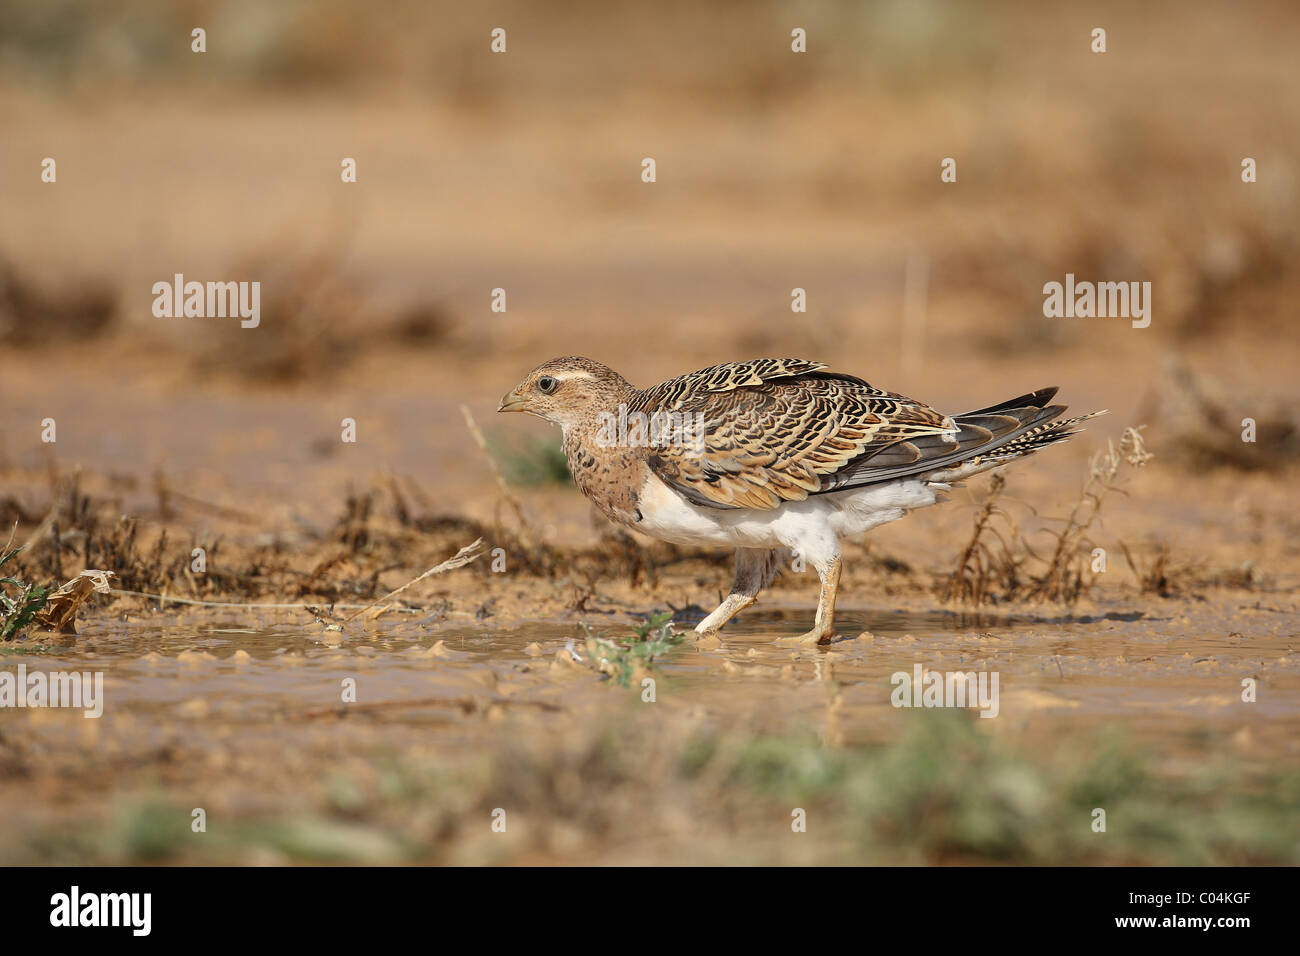 Pin-tailed Sandgrouse (Pterocles alchata). Juvenile walking in shallow water. Ciudad Real, Spain. Stock Photo